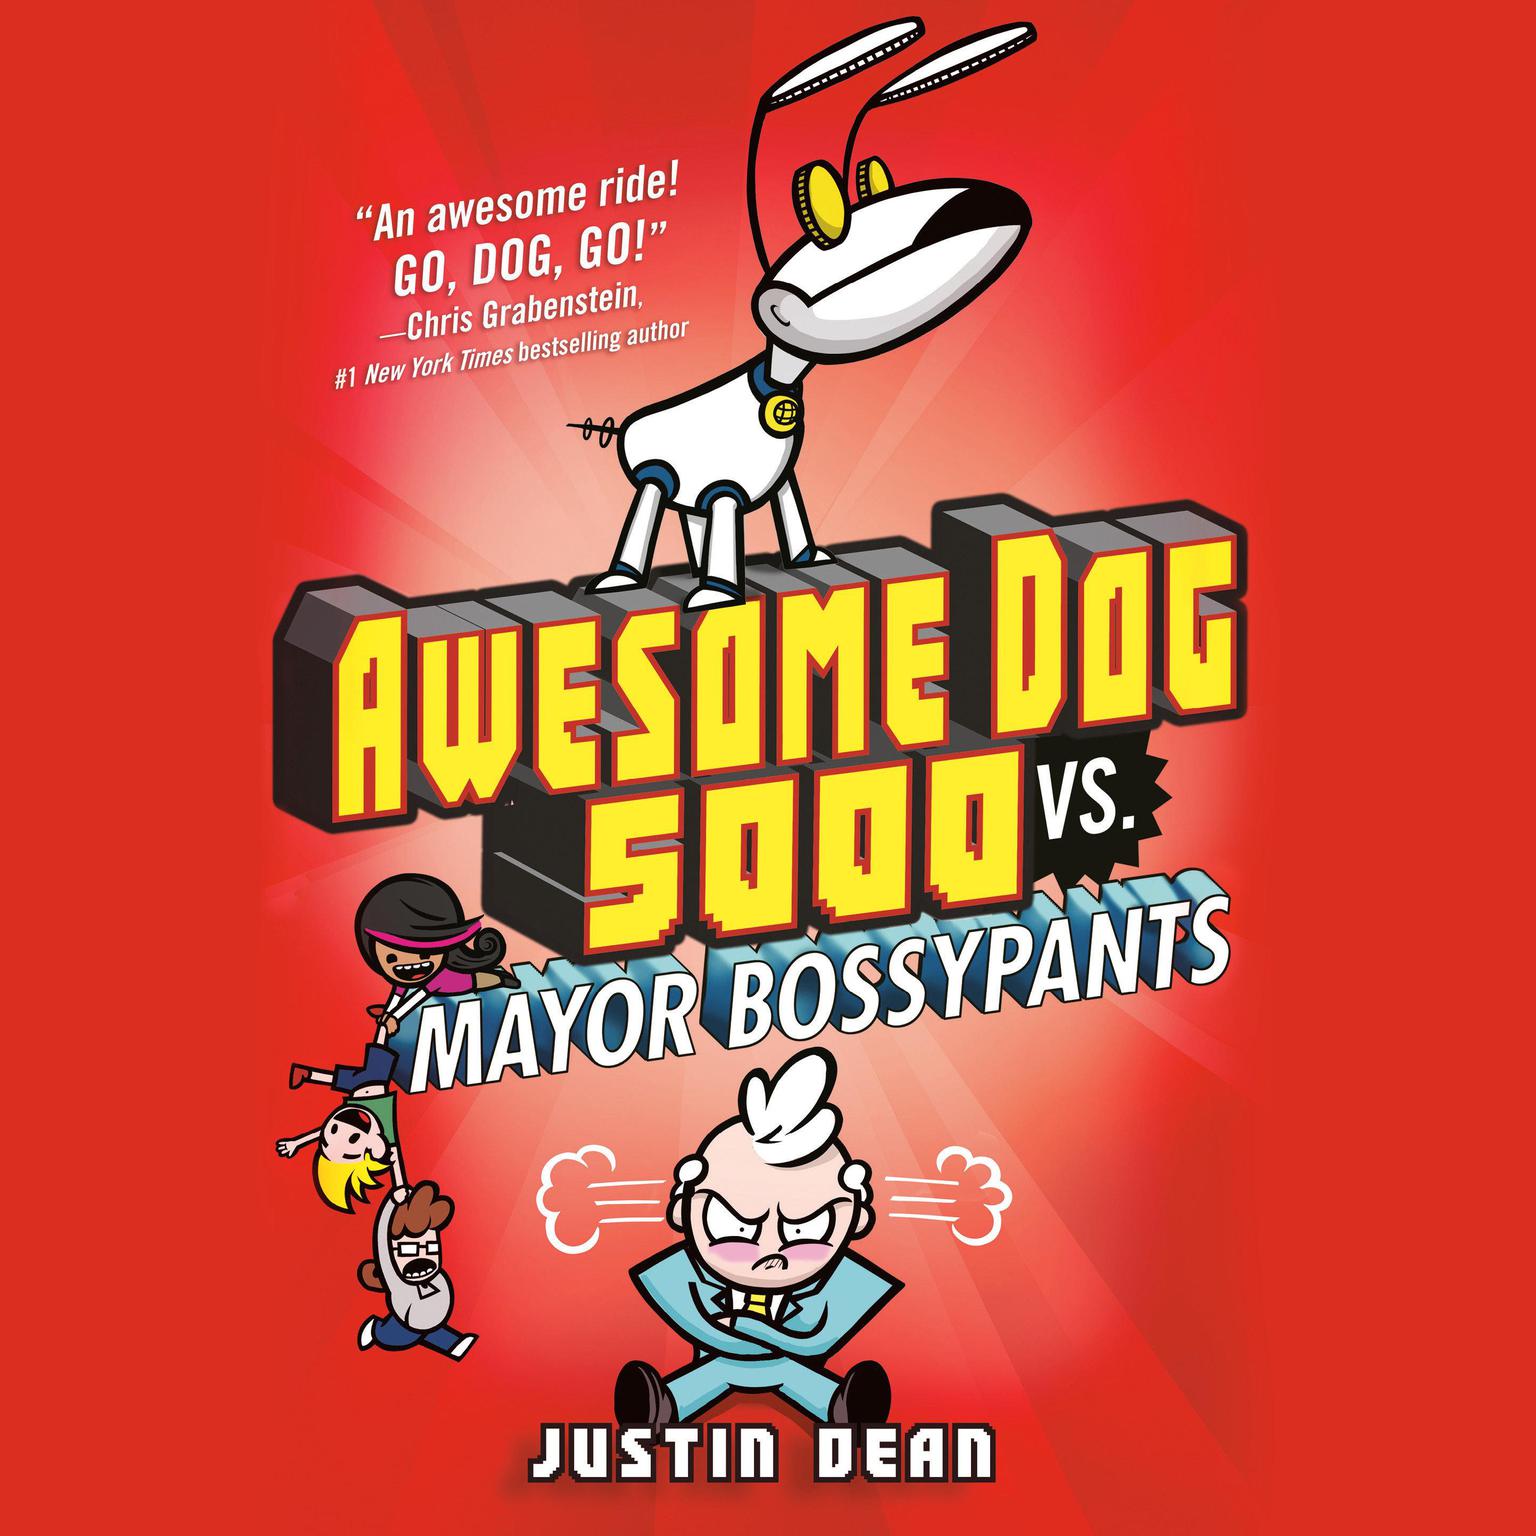 Awesome Dog 5000 vs. Mayor Bossypants (Book 2) Audiobook, by Justin Dean